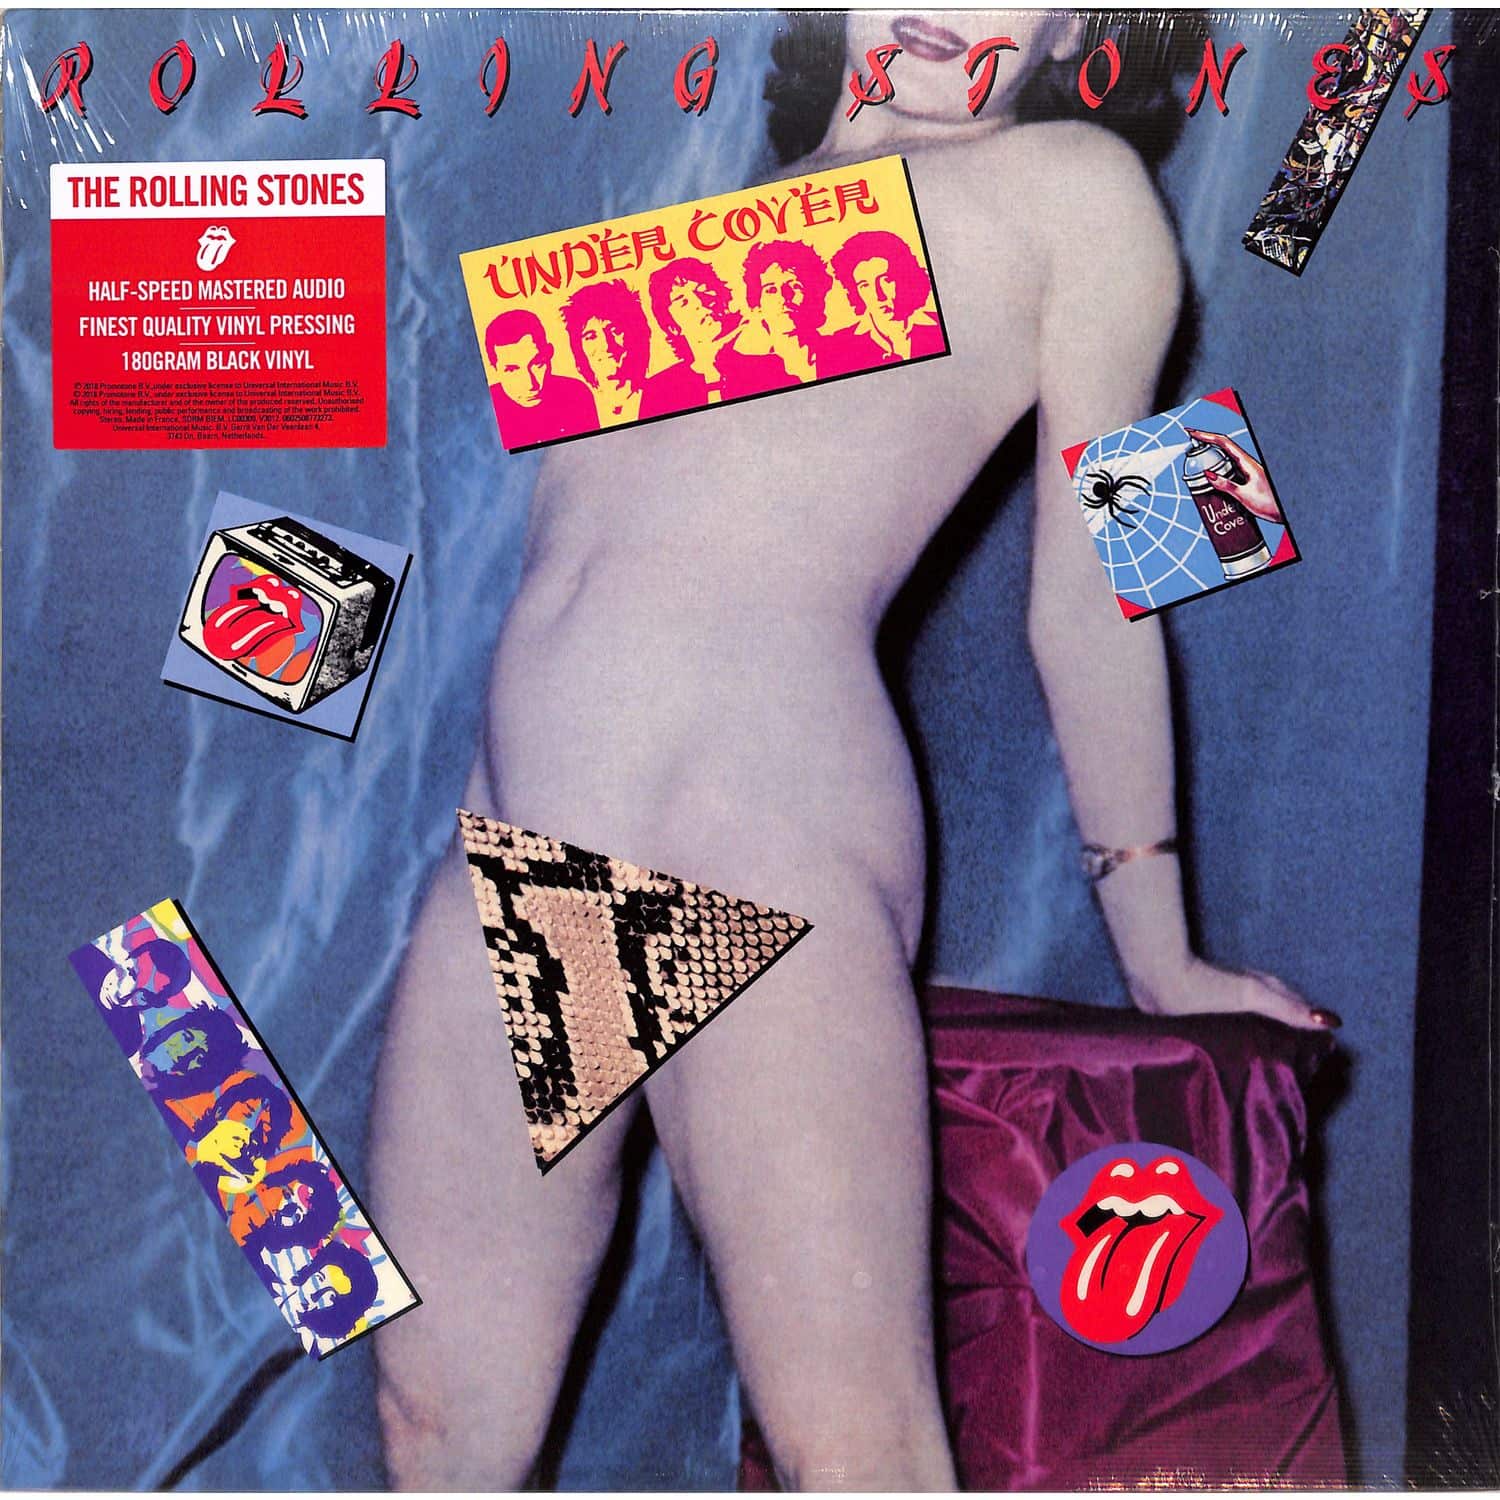 The Rolling Stones - UNDERCOVER 